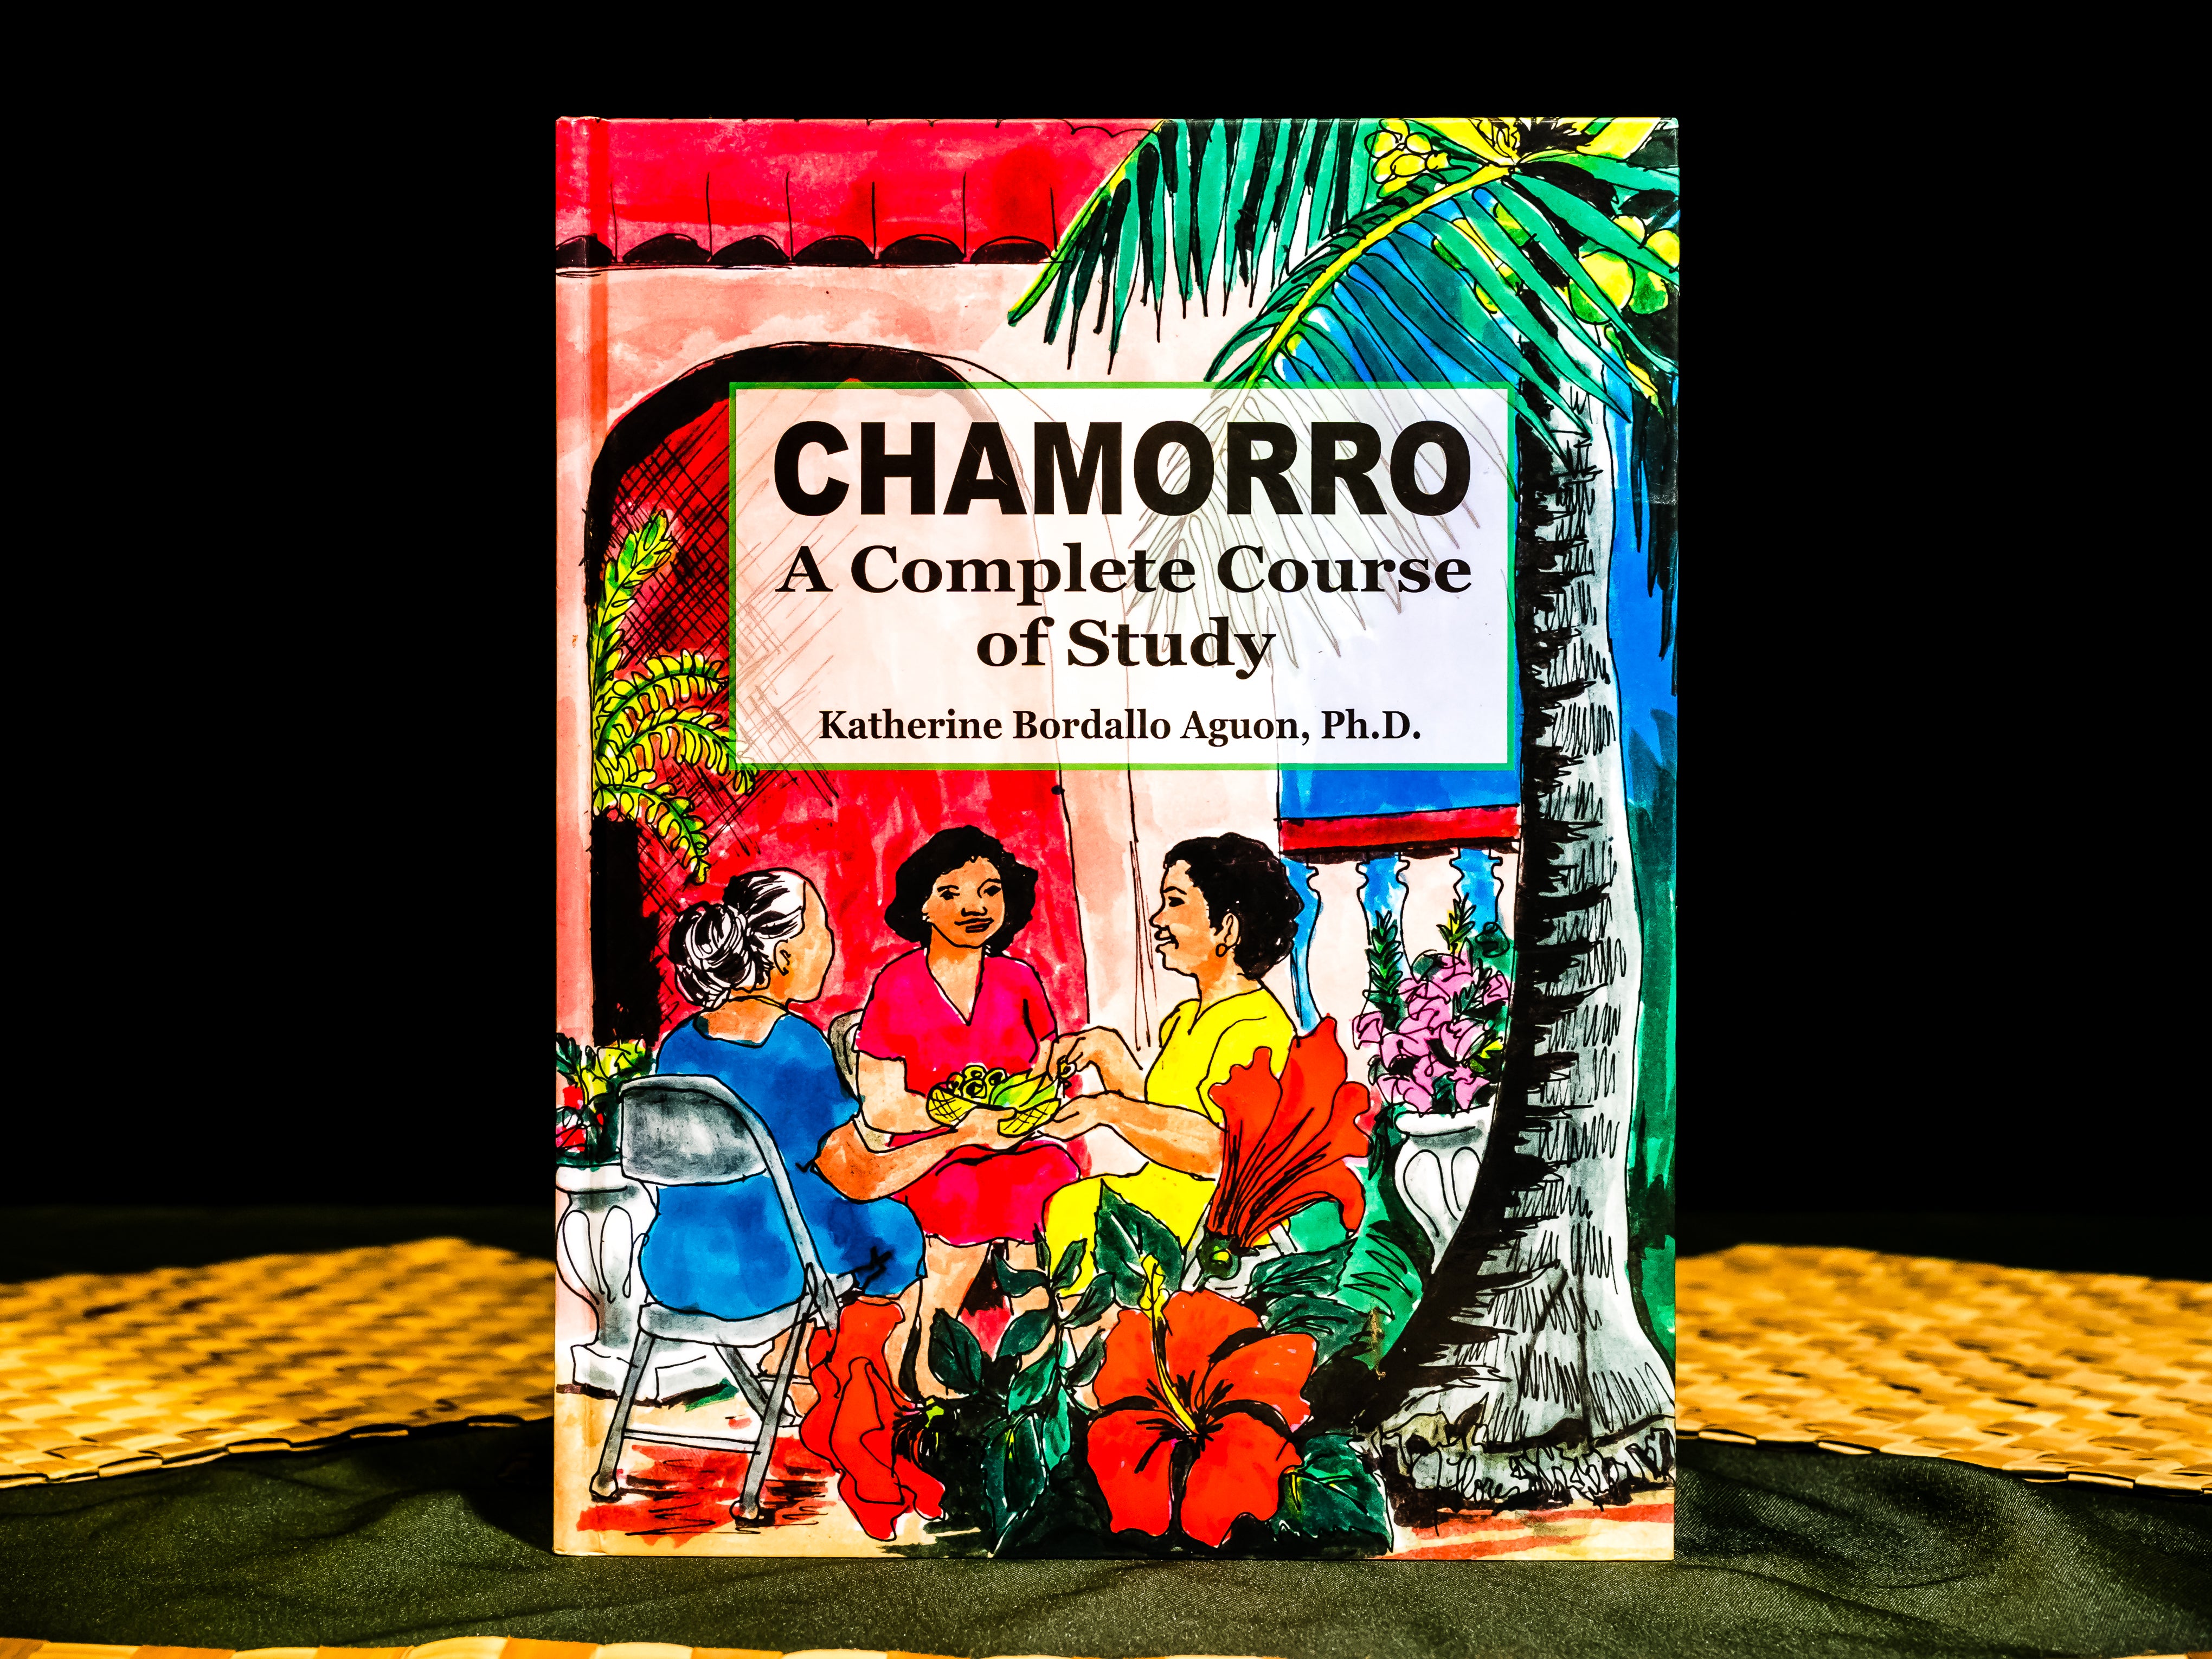 Chamorro: A Complete Course of Study